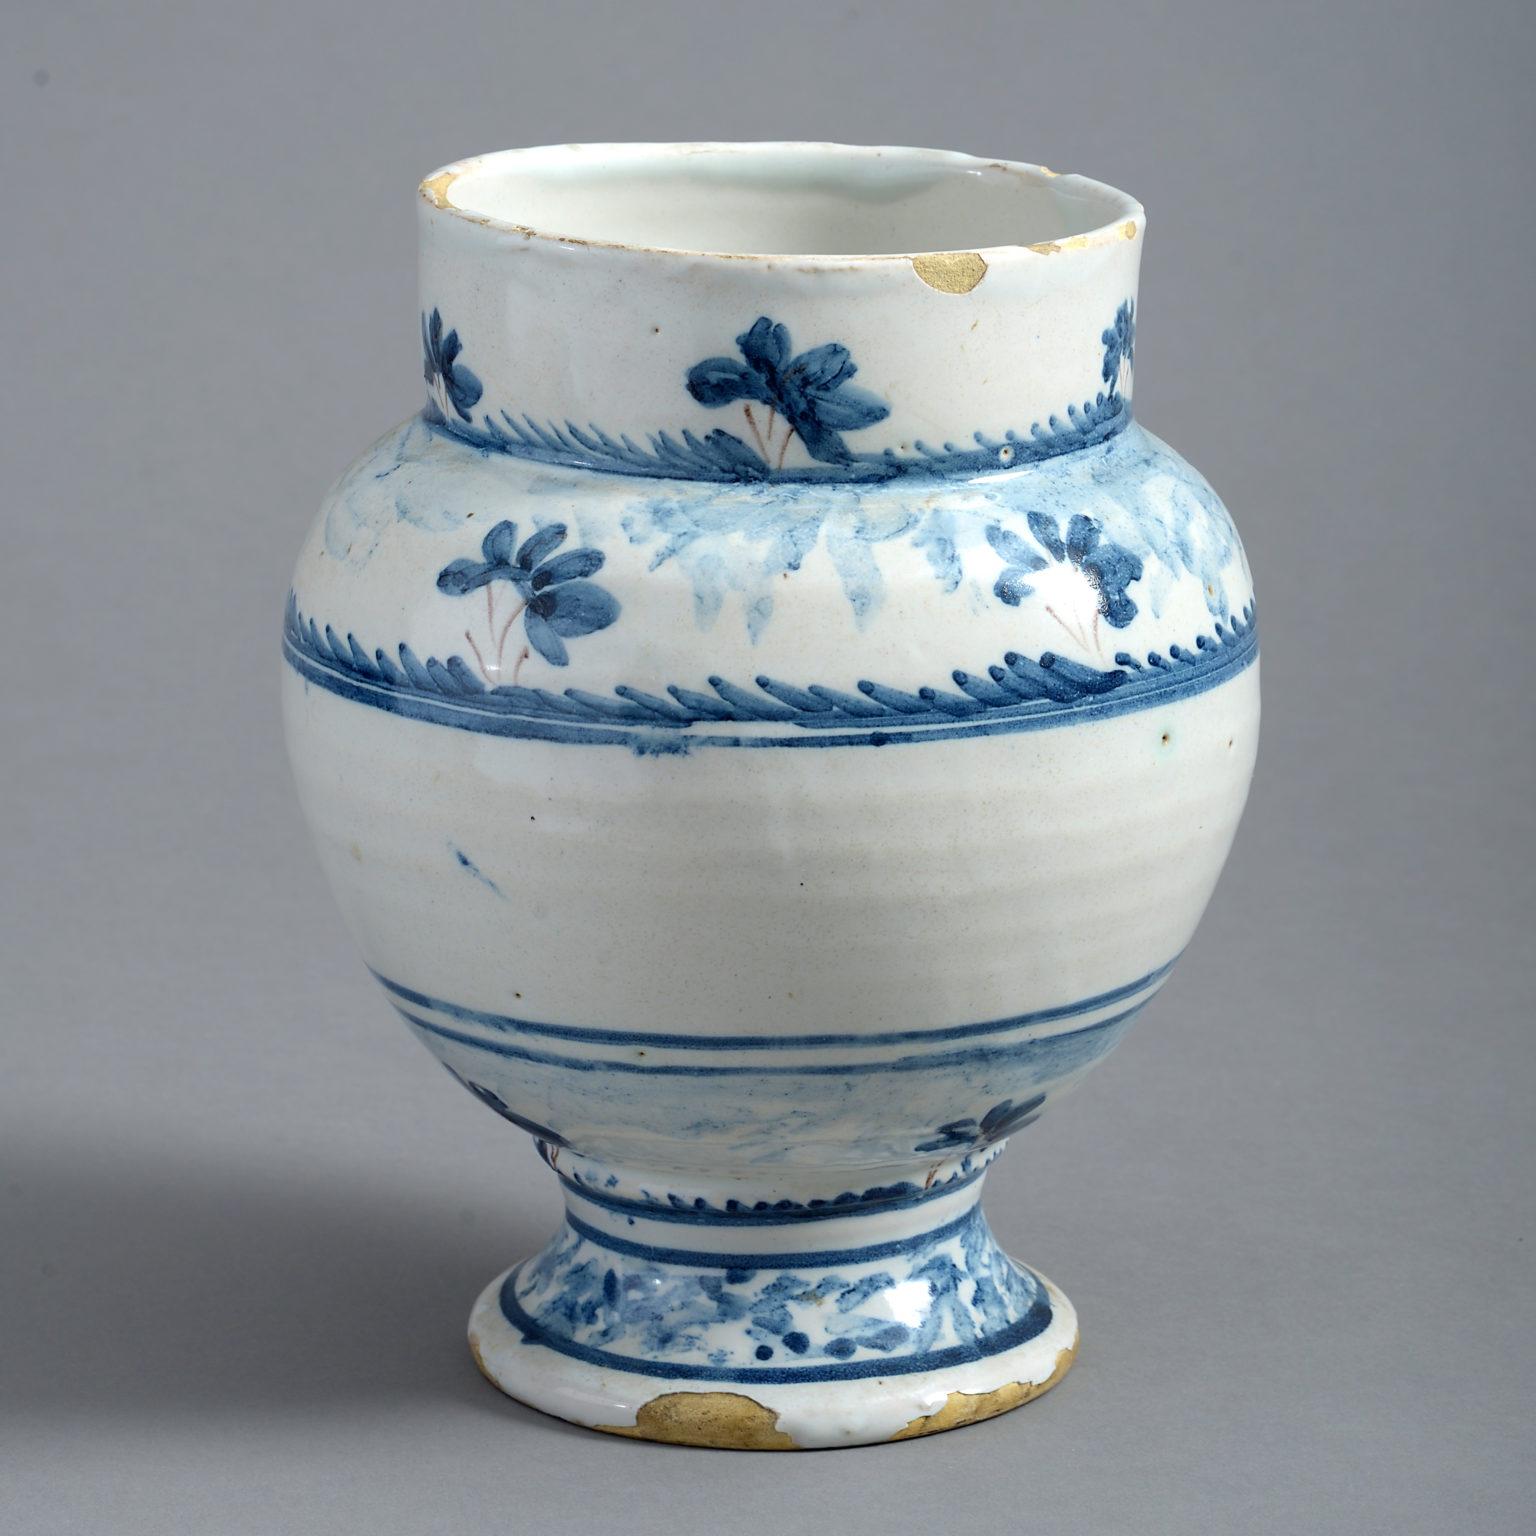 An early 18th century blue and white delft pottery vase, of generous form and decorated sparingly with a stylised landscape of trees in blue and magenta glazes upon a white ground.